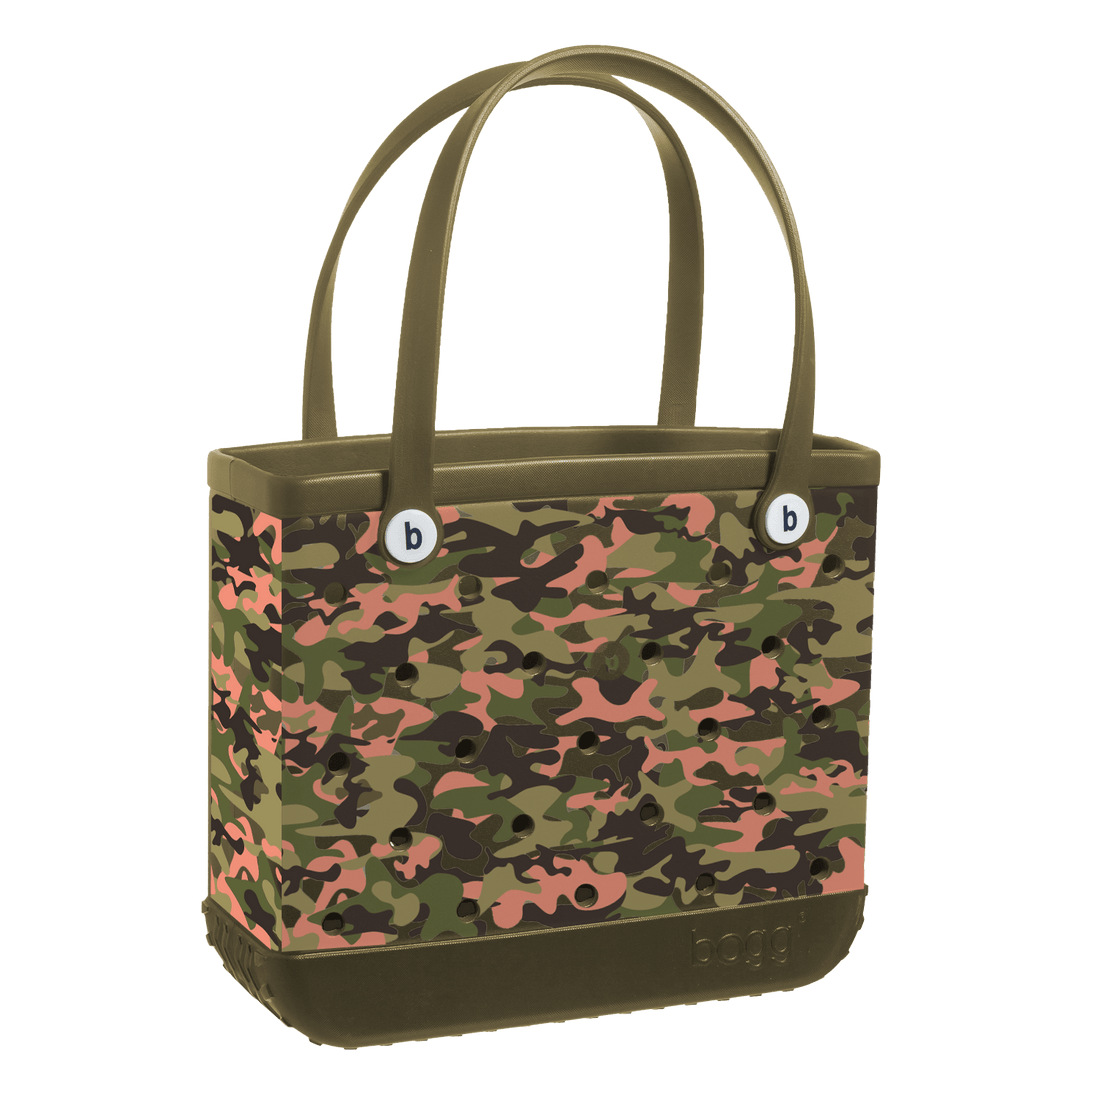 Limited Edition Baby Bogg Bag - Kitty Hawk Kites Online Store